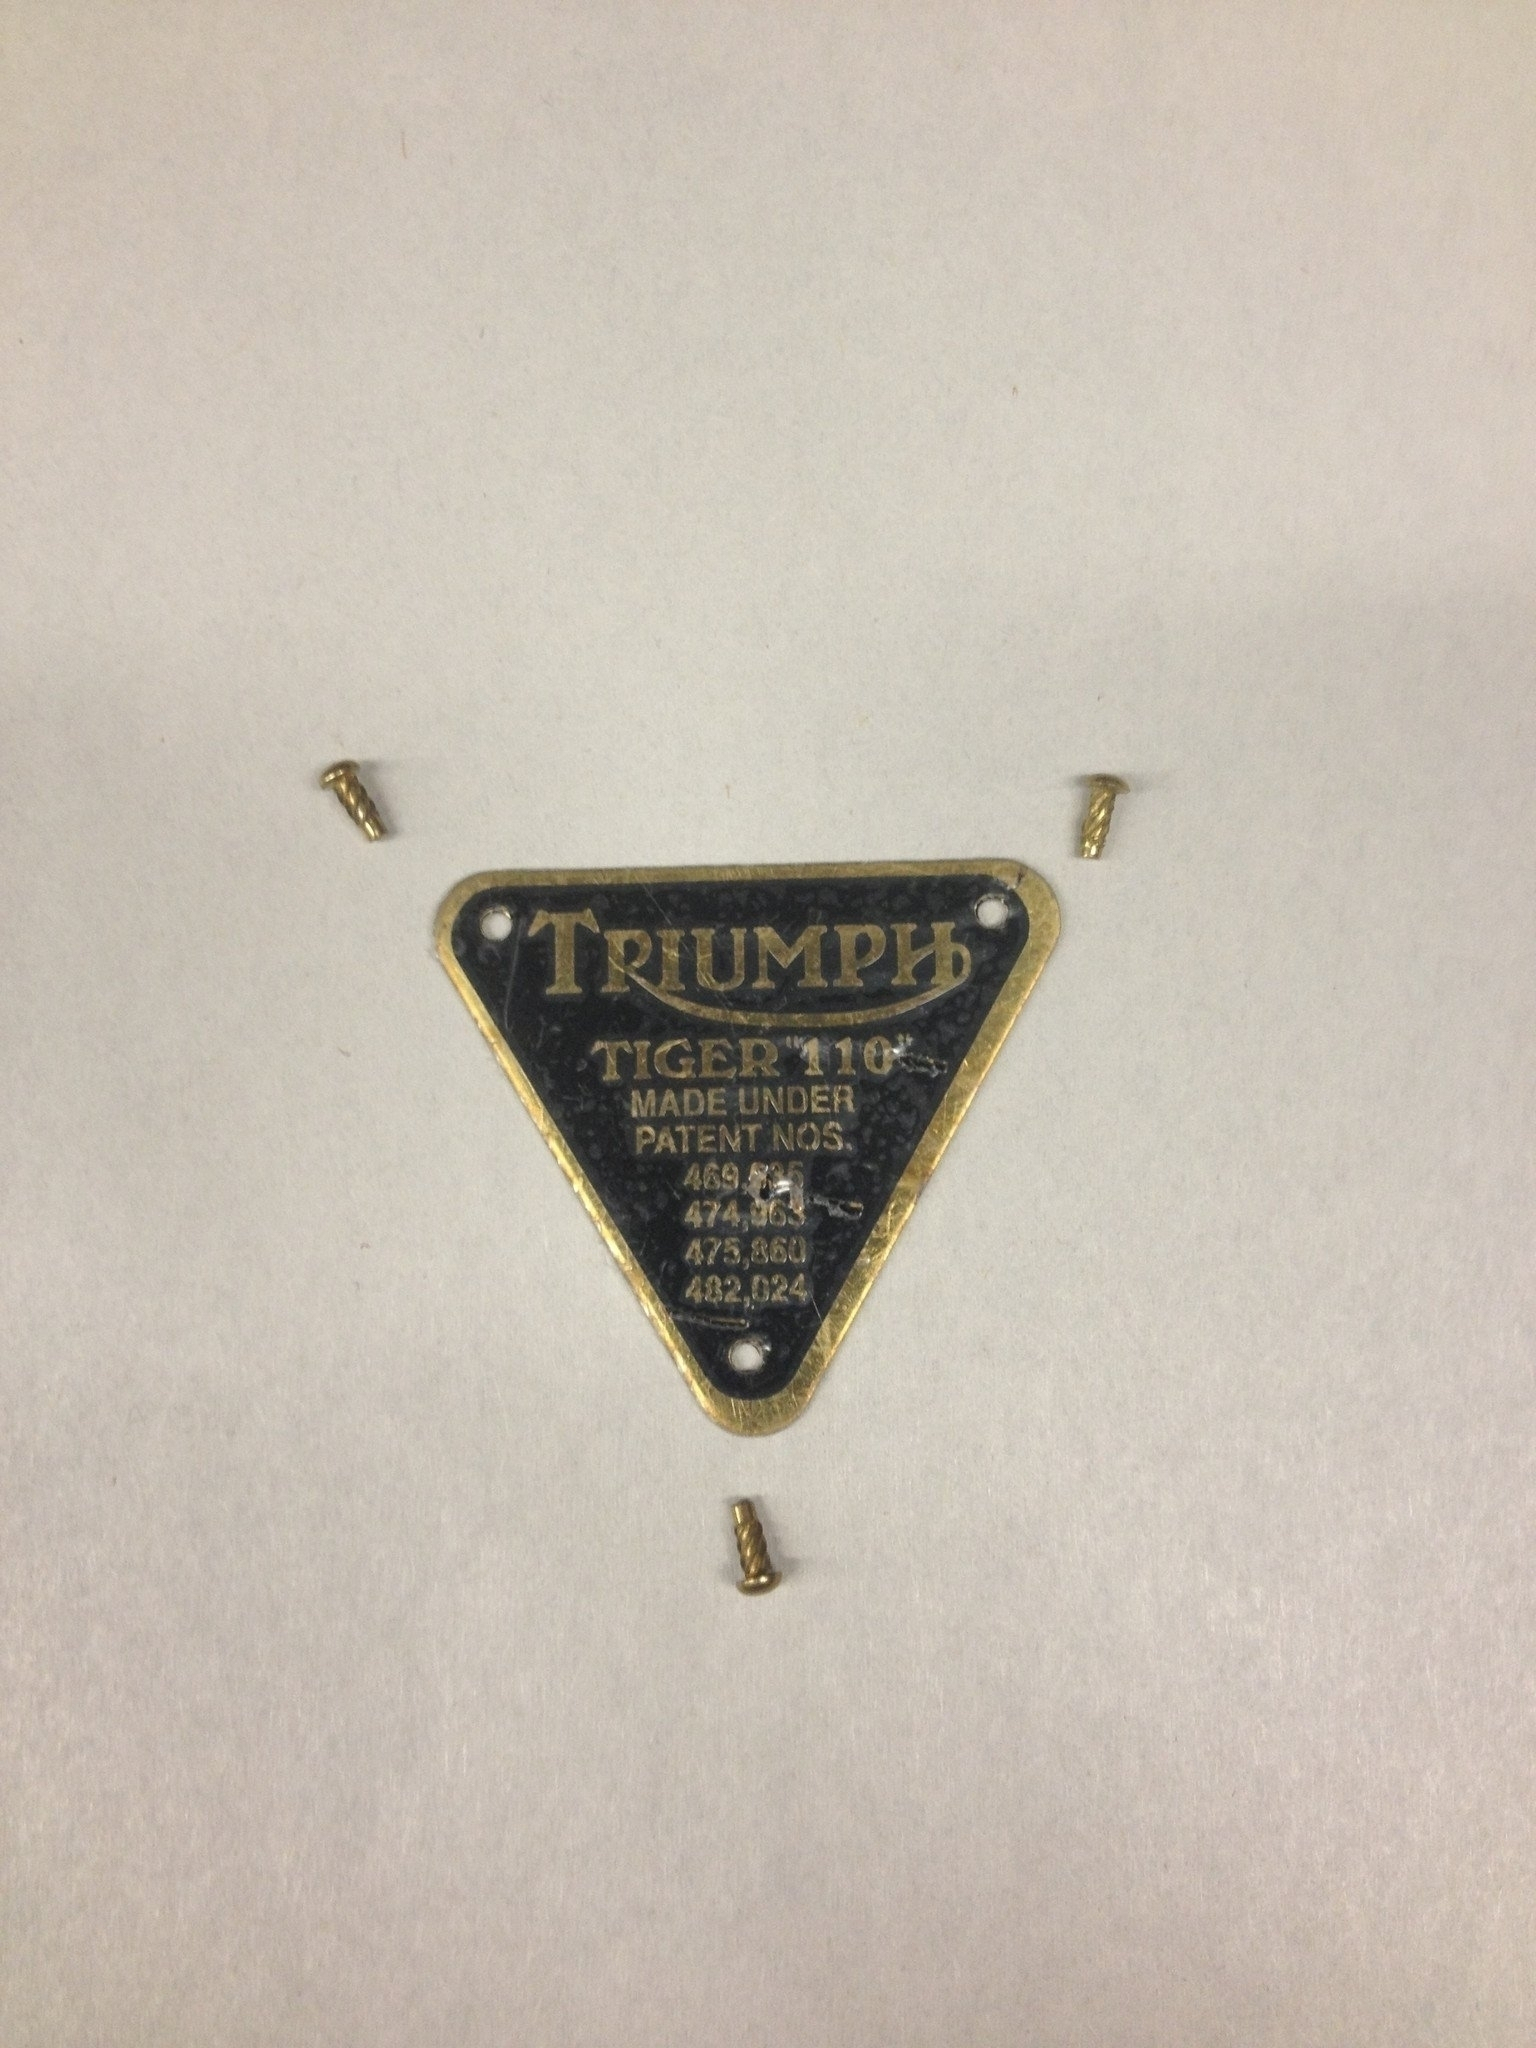 PATENT PLATE BRASS TIGER 110 WITH RIVETS-TRIUMPH